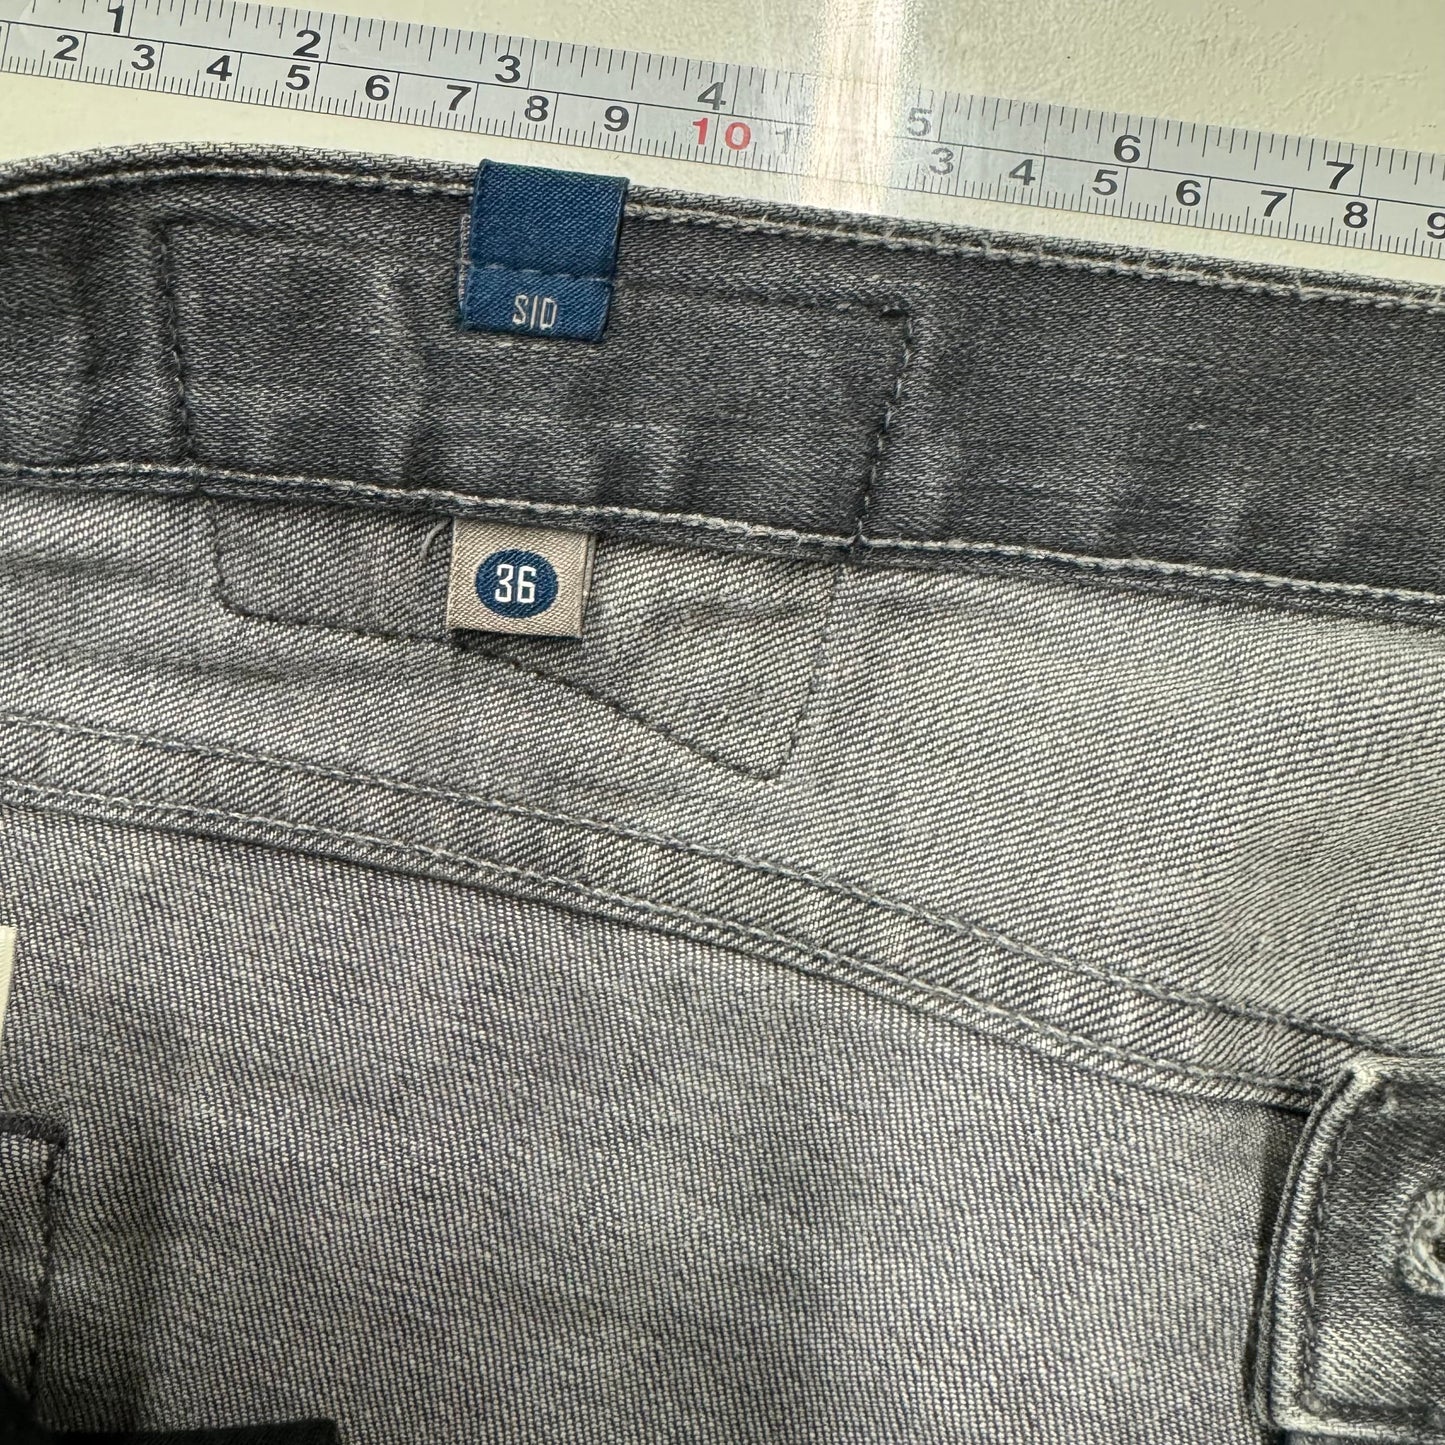 Citizens of Humanity | ‘Sid’ Straight Perform Denim Jeans | Color: Gray | Size: 36/29 | Pre-Owned